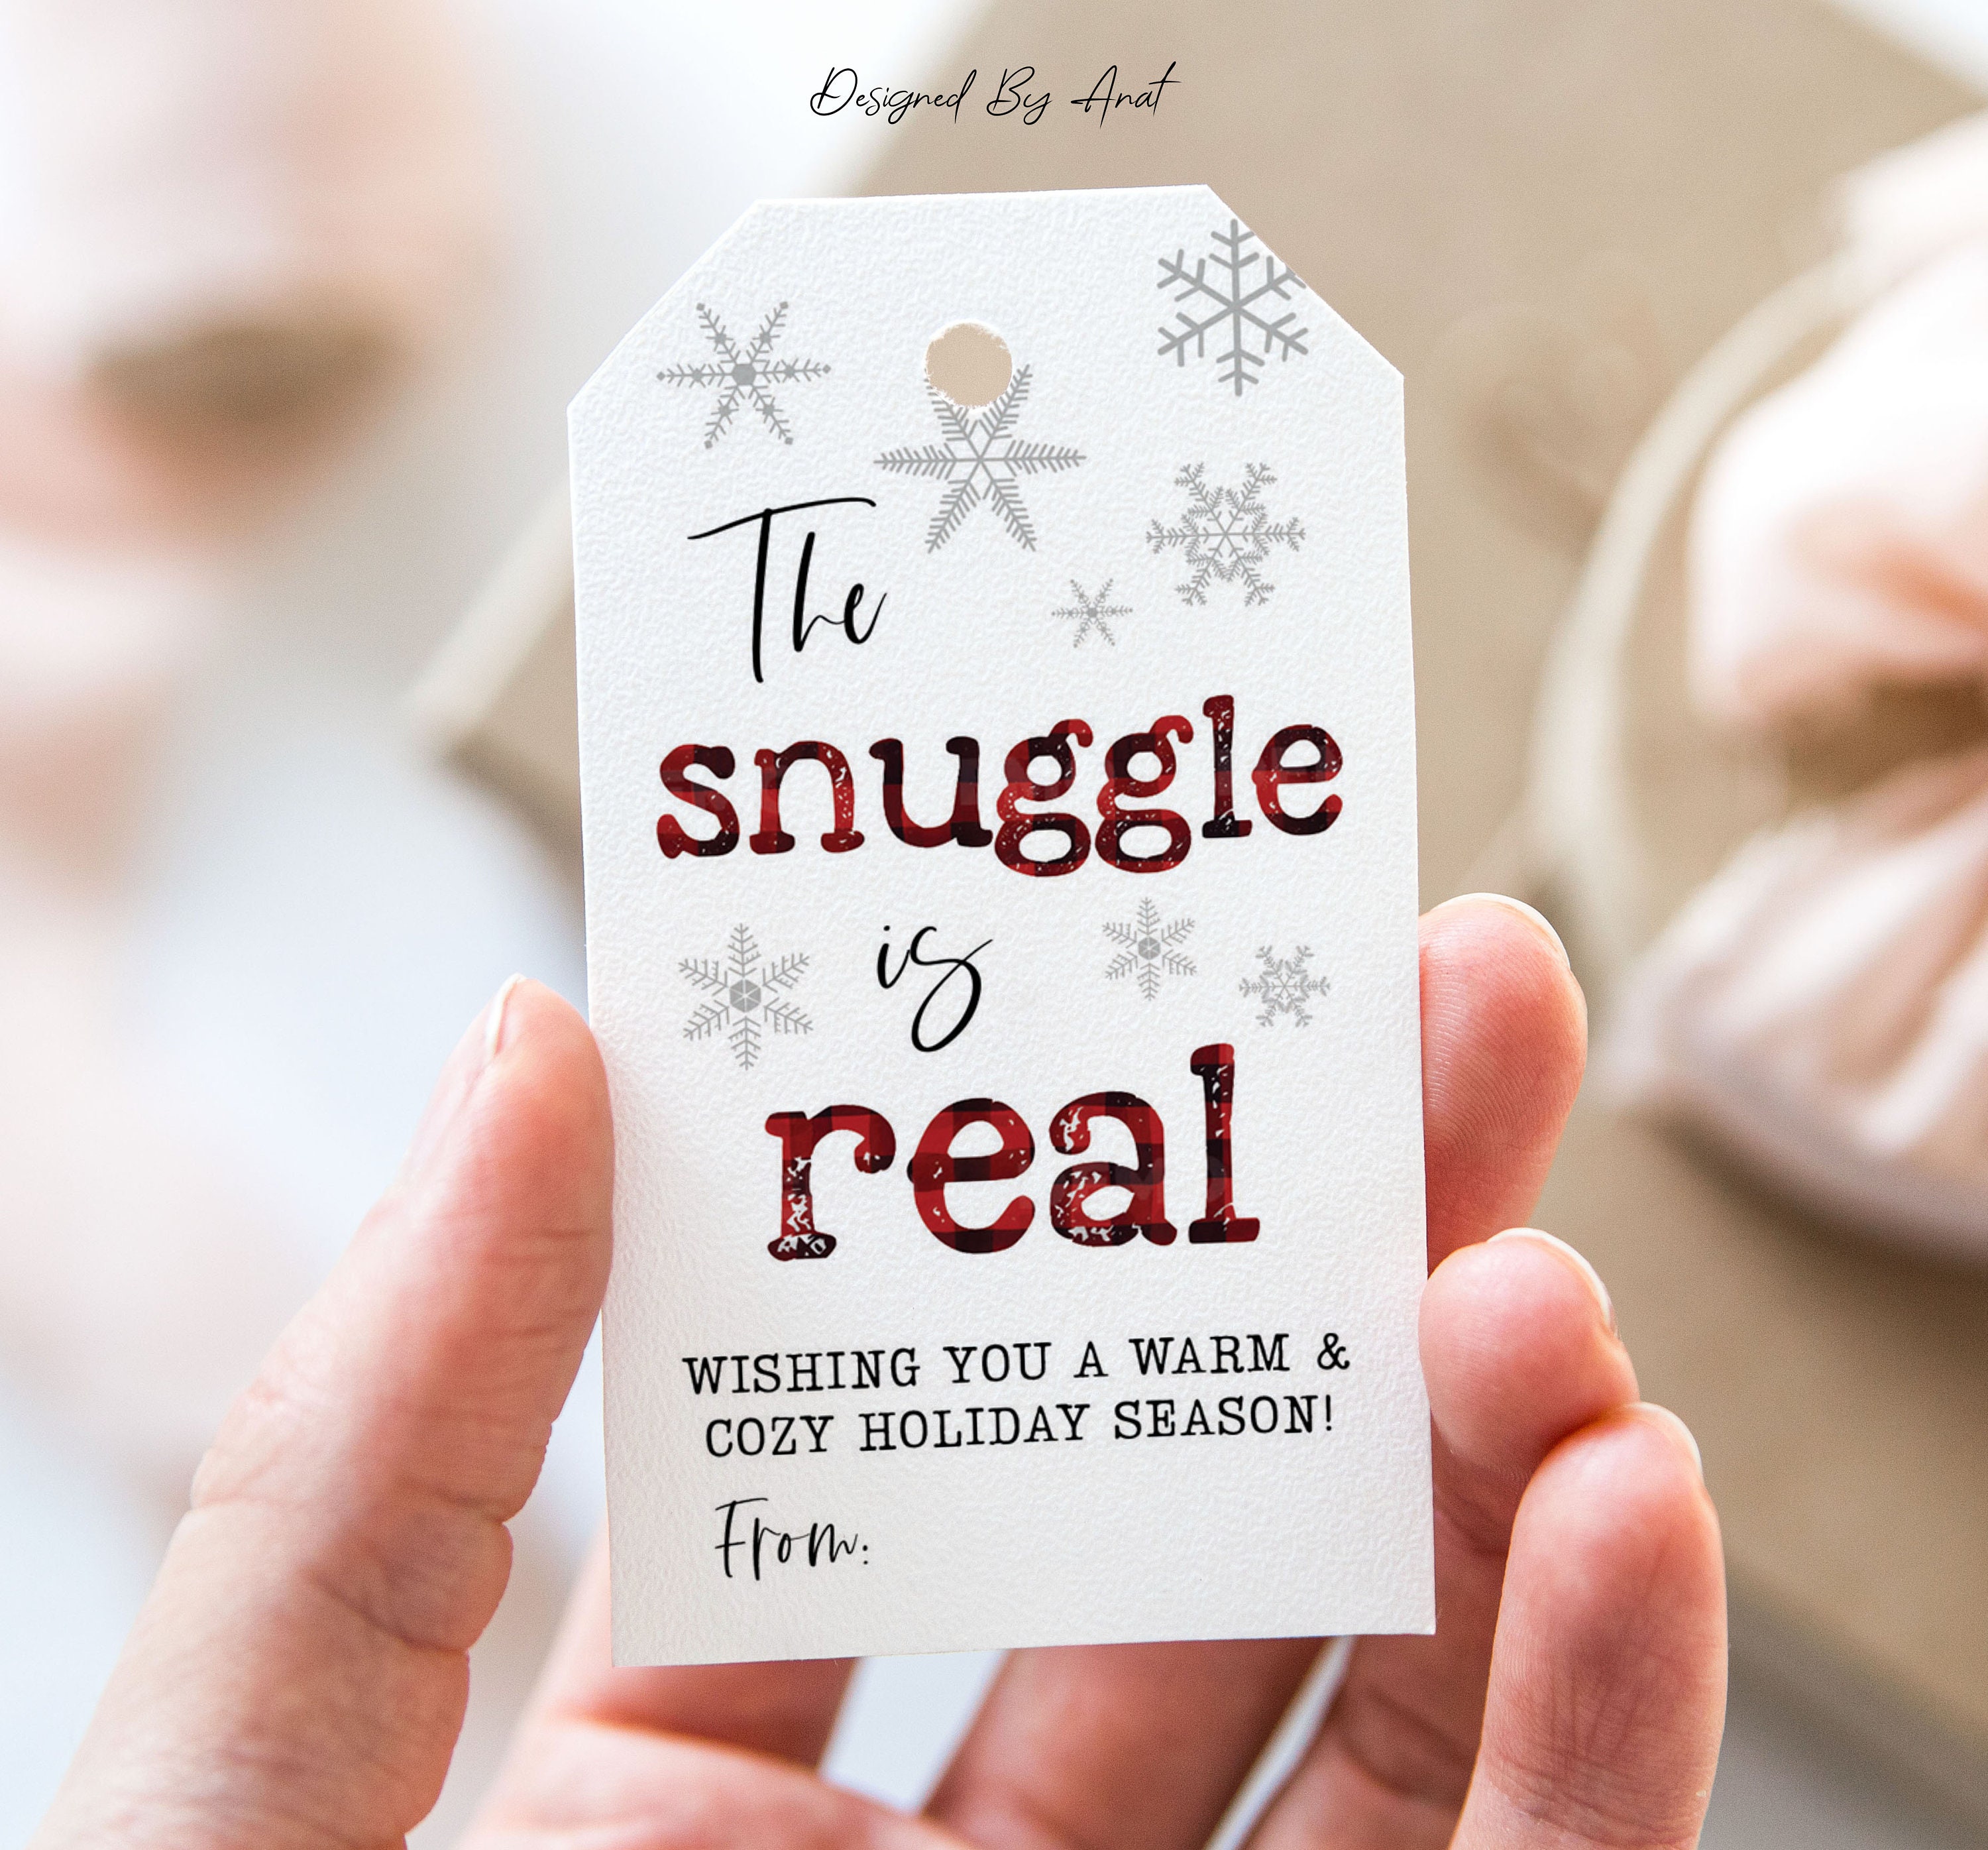 Set of Vector Tag Templates. Christmas tags with blank lines and designs.  Gifts, gift bag, socks, gift boxes. Gift tags to give or fill in a name at  a holiday party. 13336943